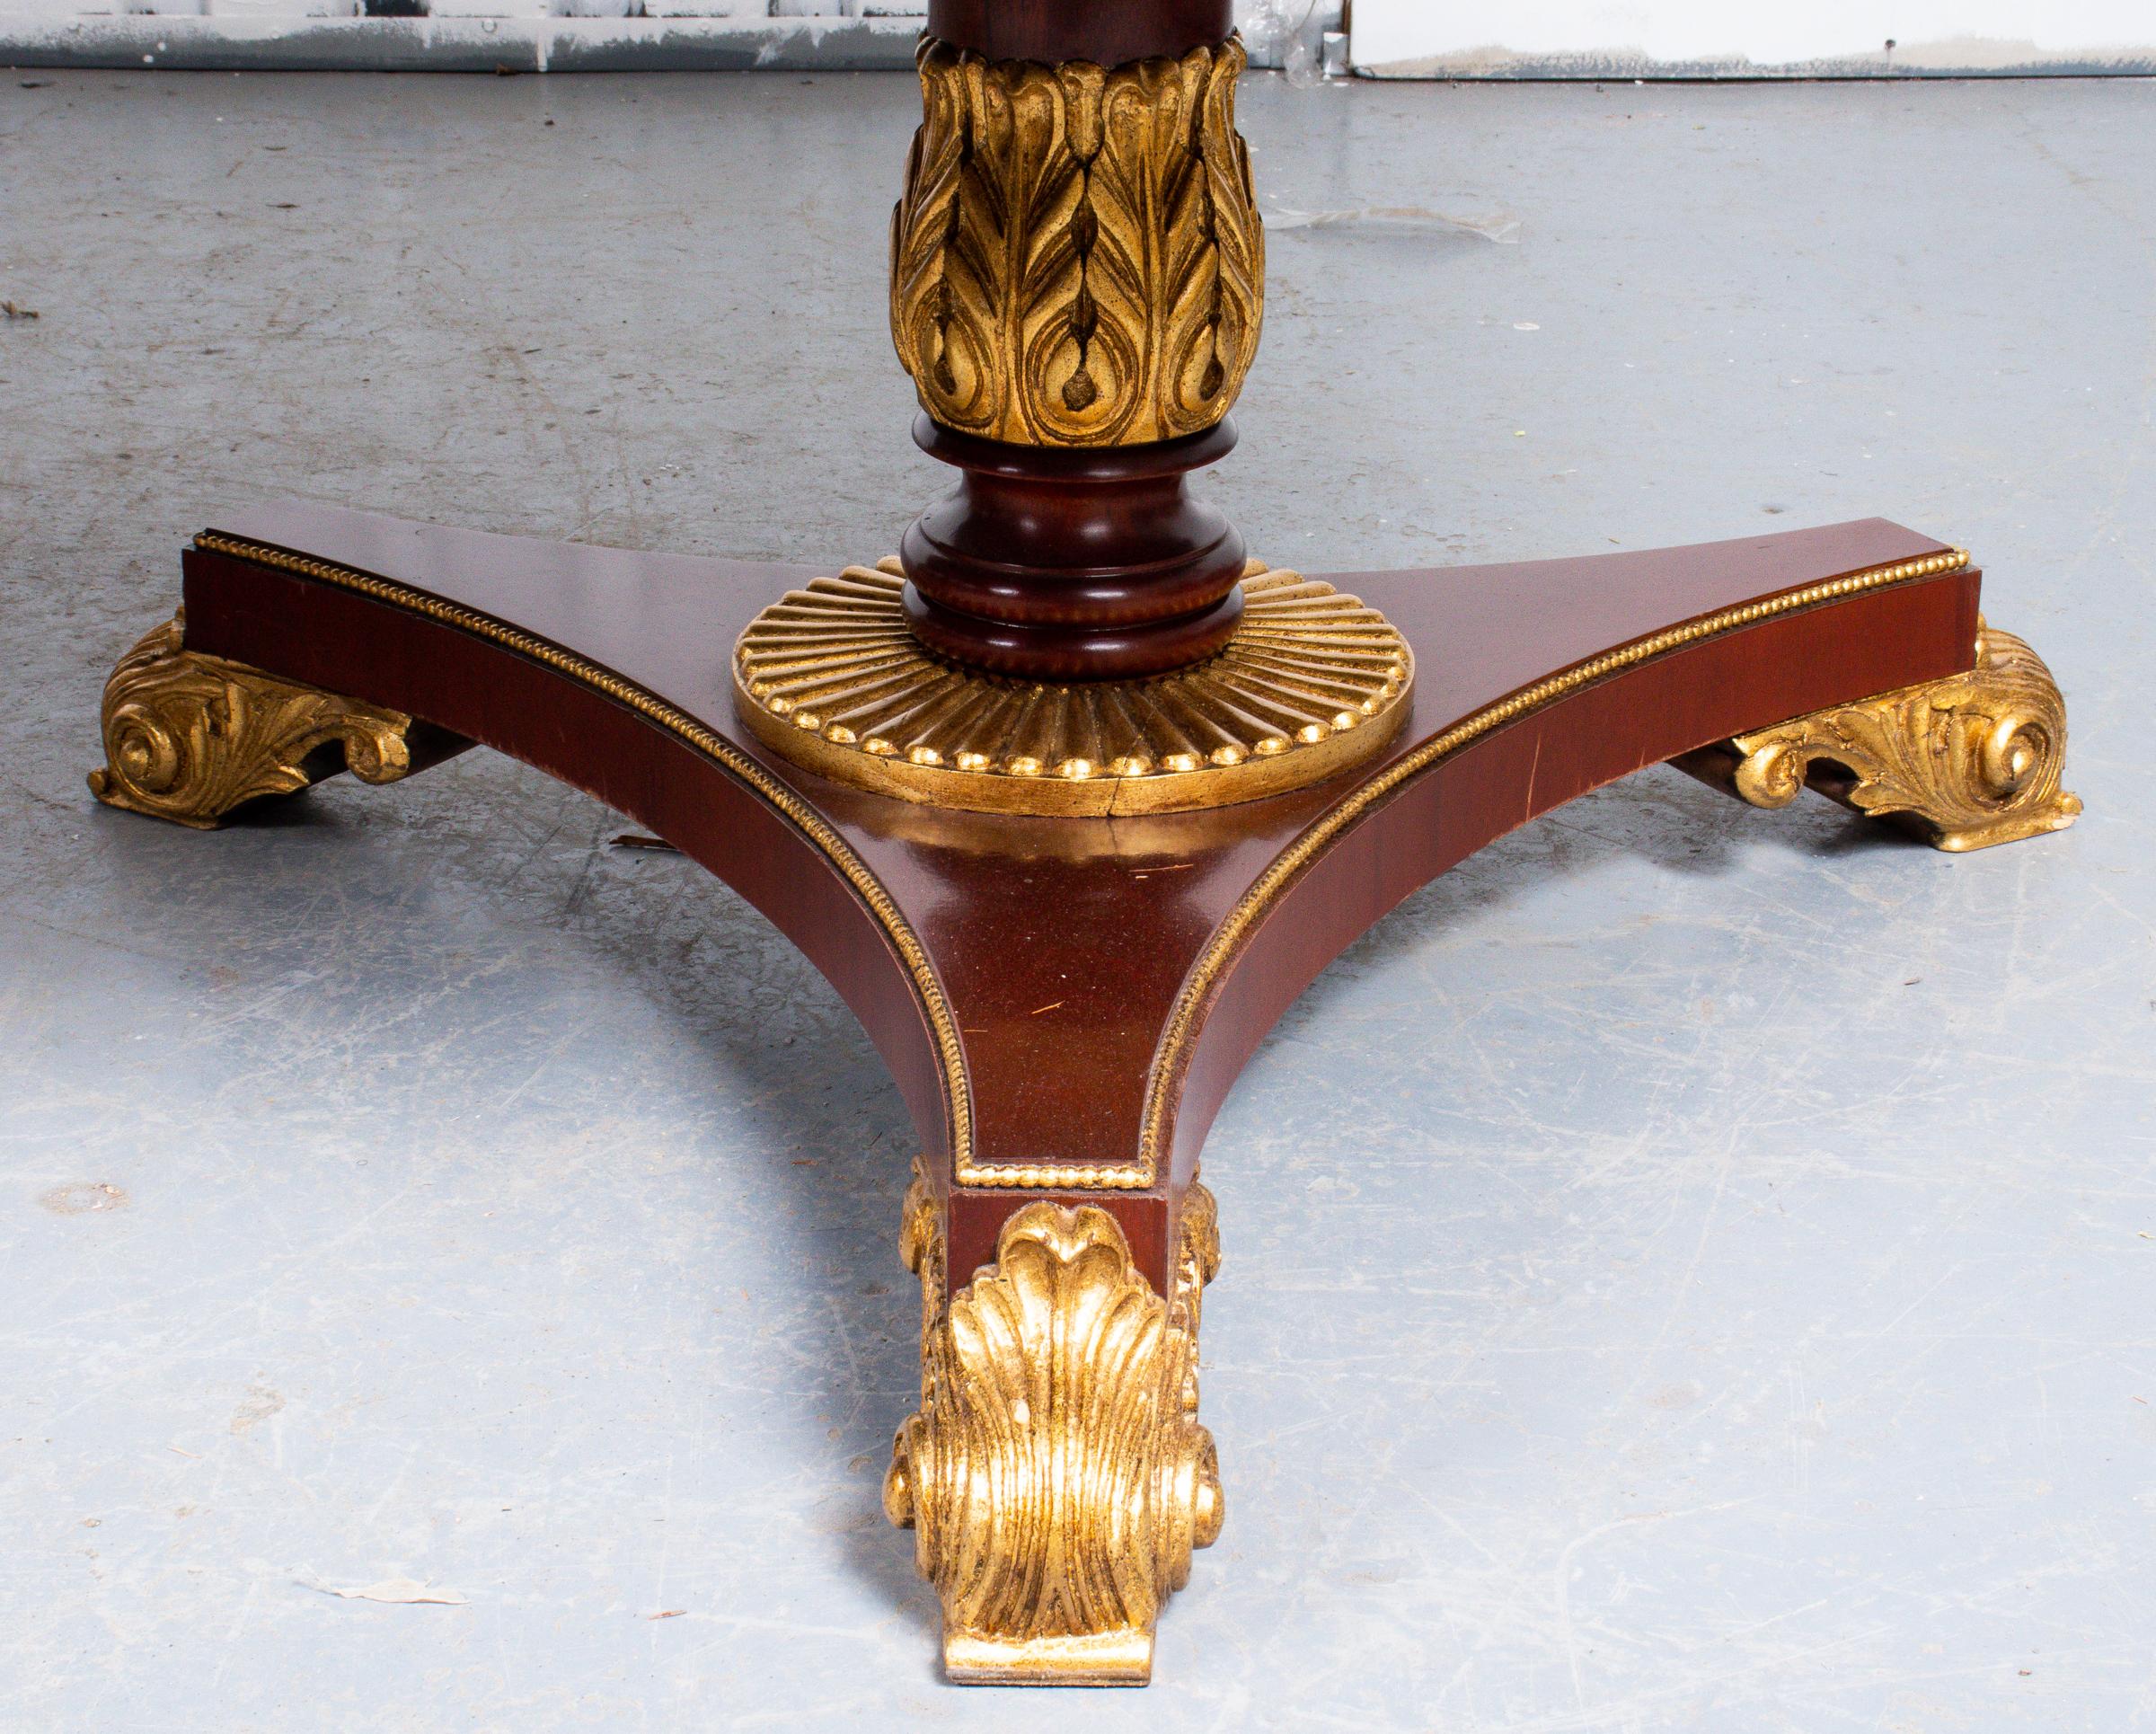 Regency style mahogany extension dining table, the top with banded border, the two pedestals with parcel gilt acanthus motif details to the supports and feet, with three leaves. Measures: 28.5” H x 46” W x 72” D, each leaf 16